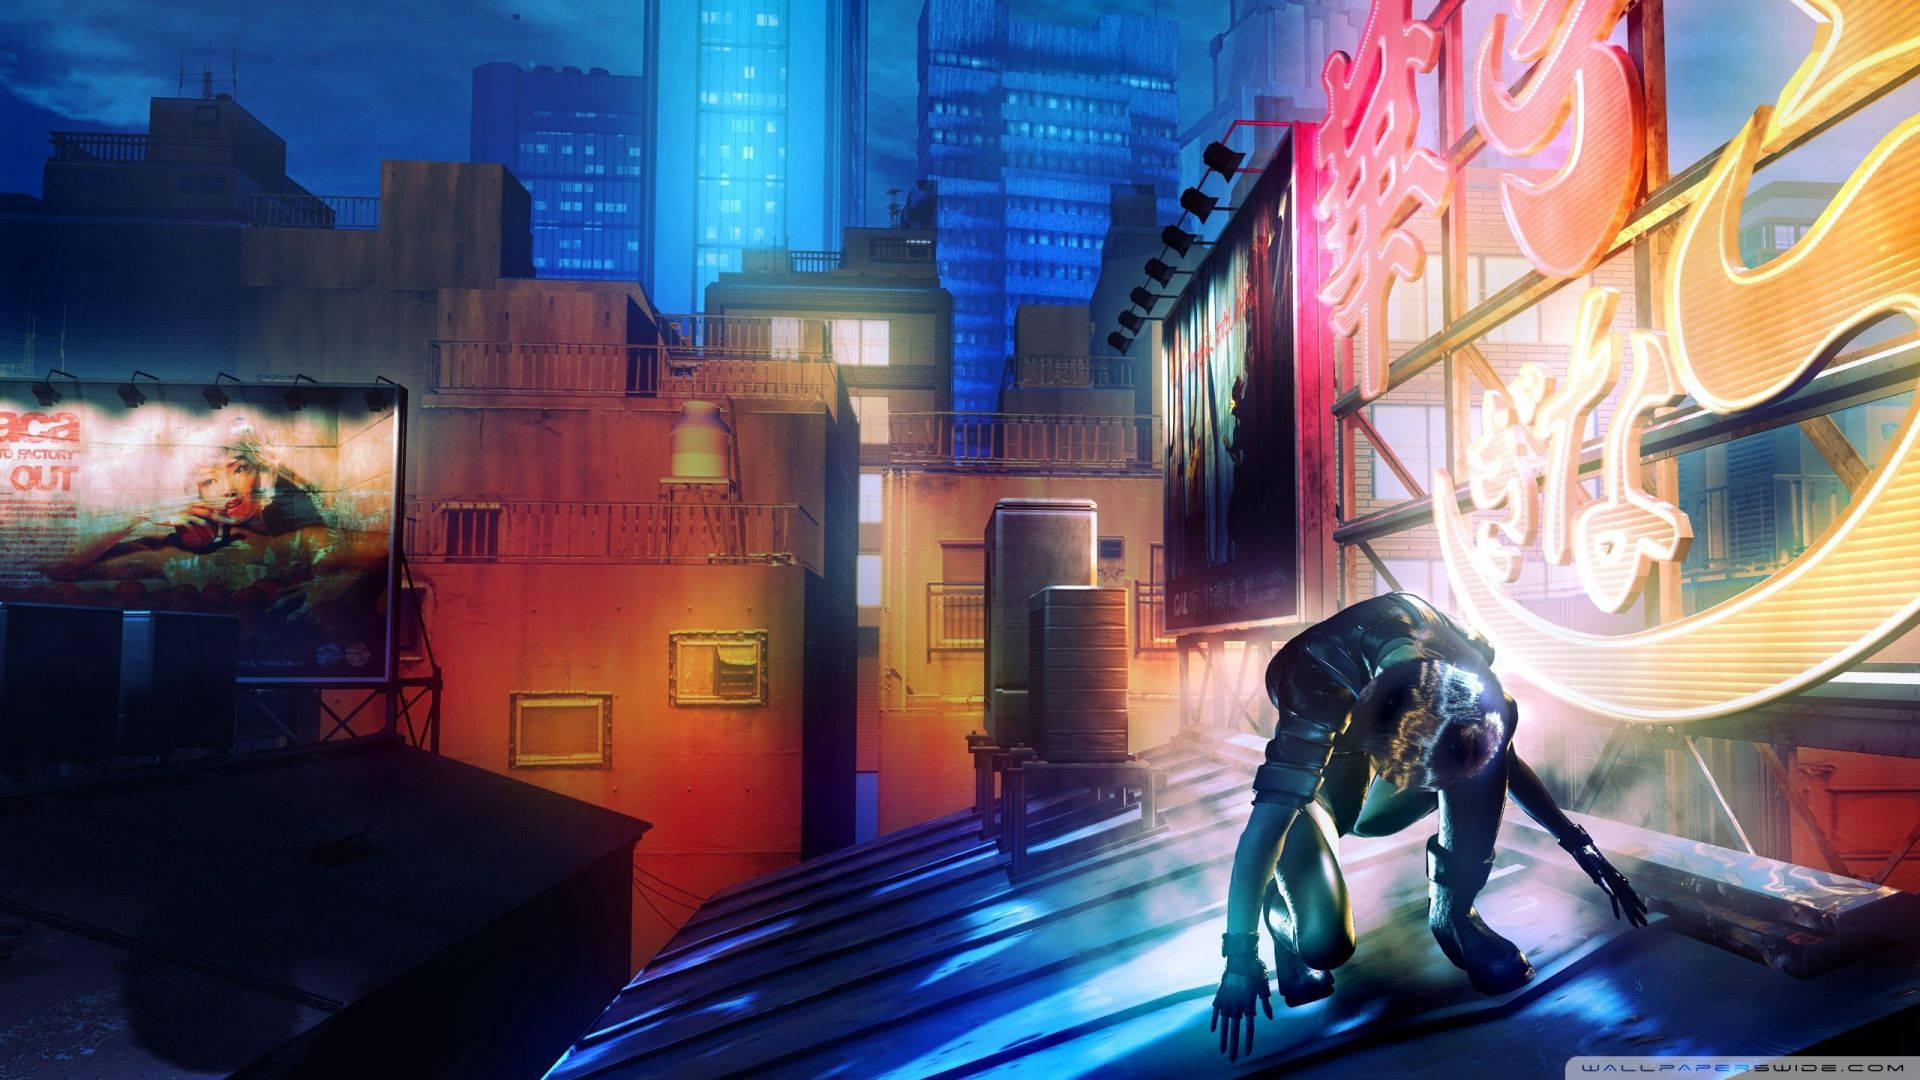 Ghost In The Shell Metropolis Anime Background